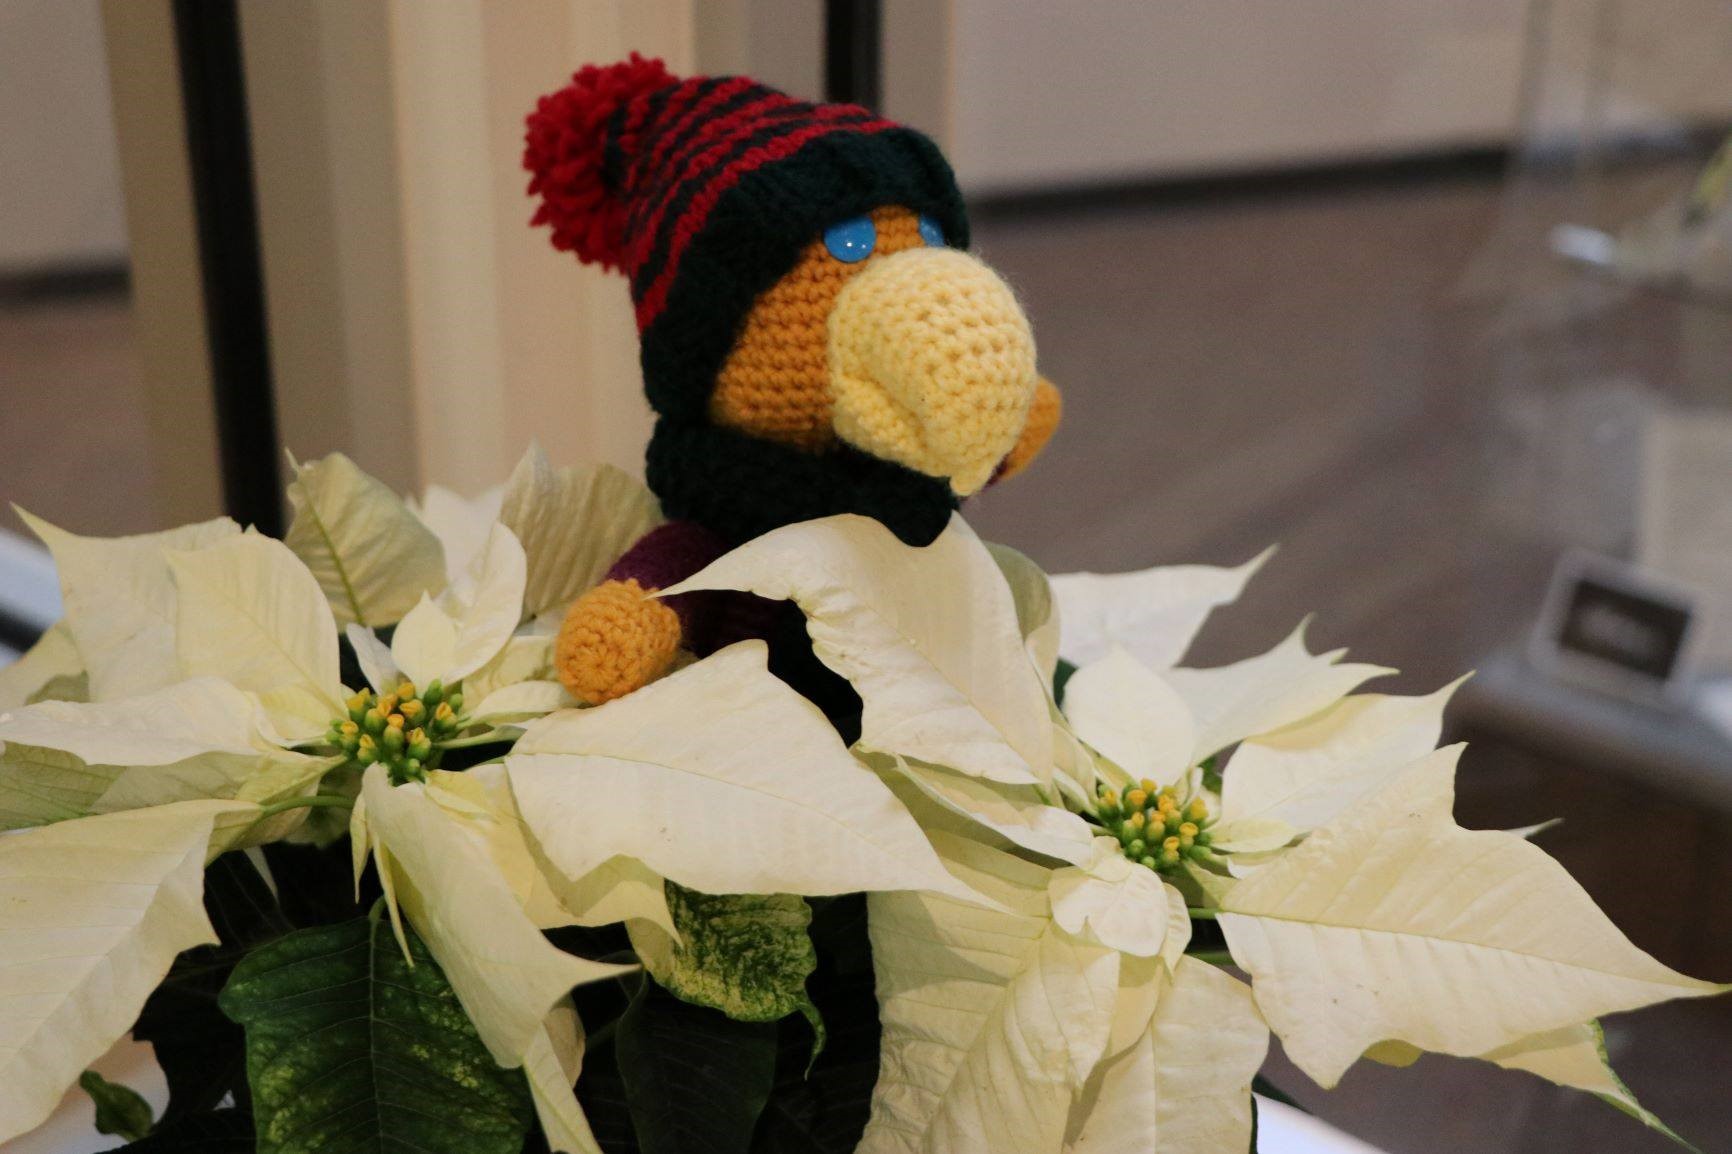 A photo of a small, crocheted Awesome Eagle in a white poinsettia plant.